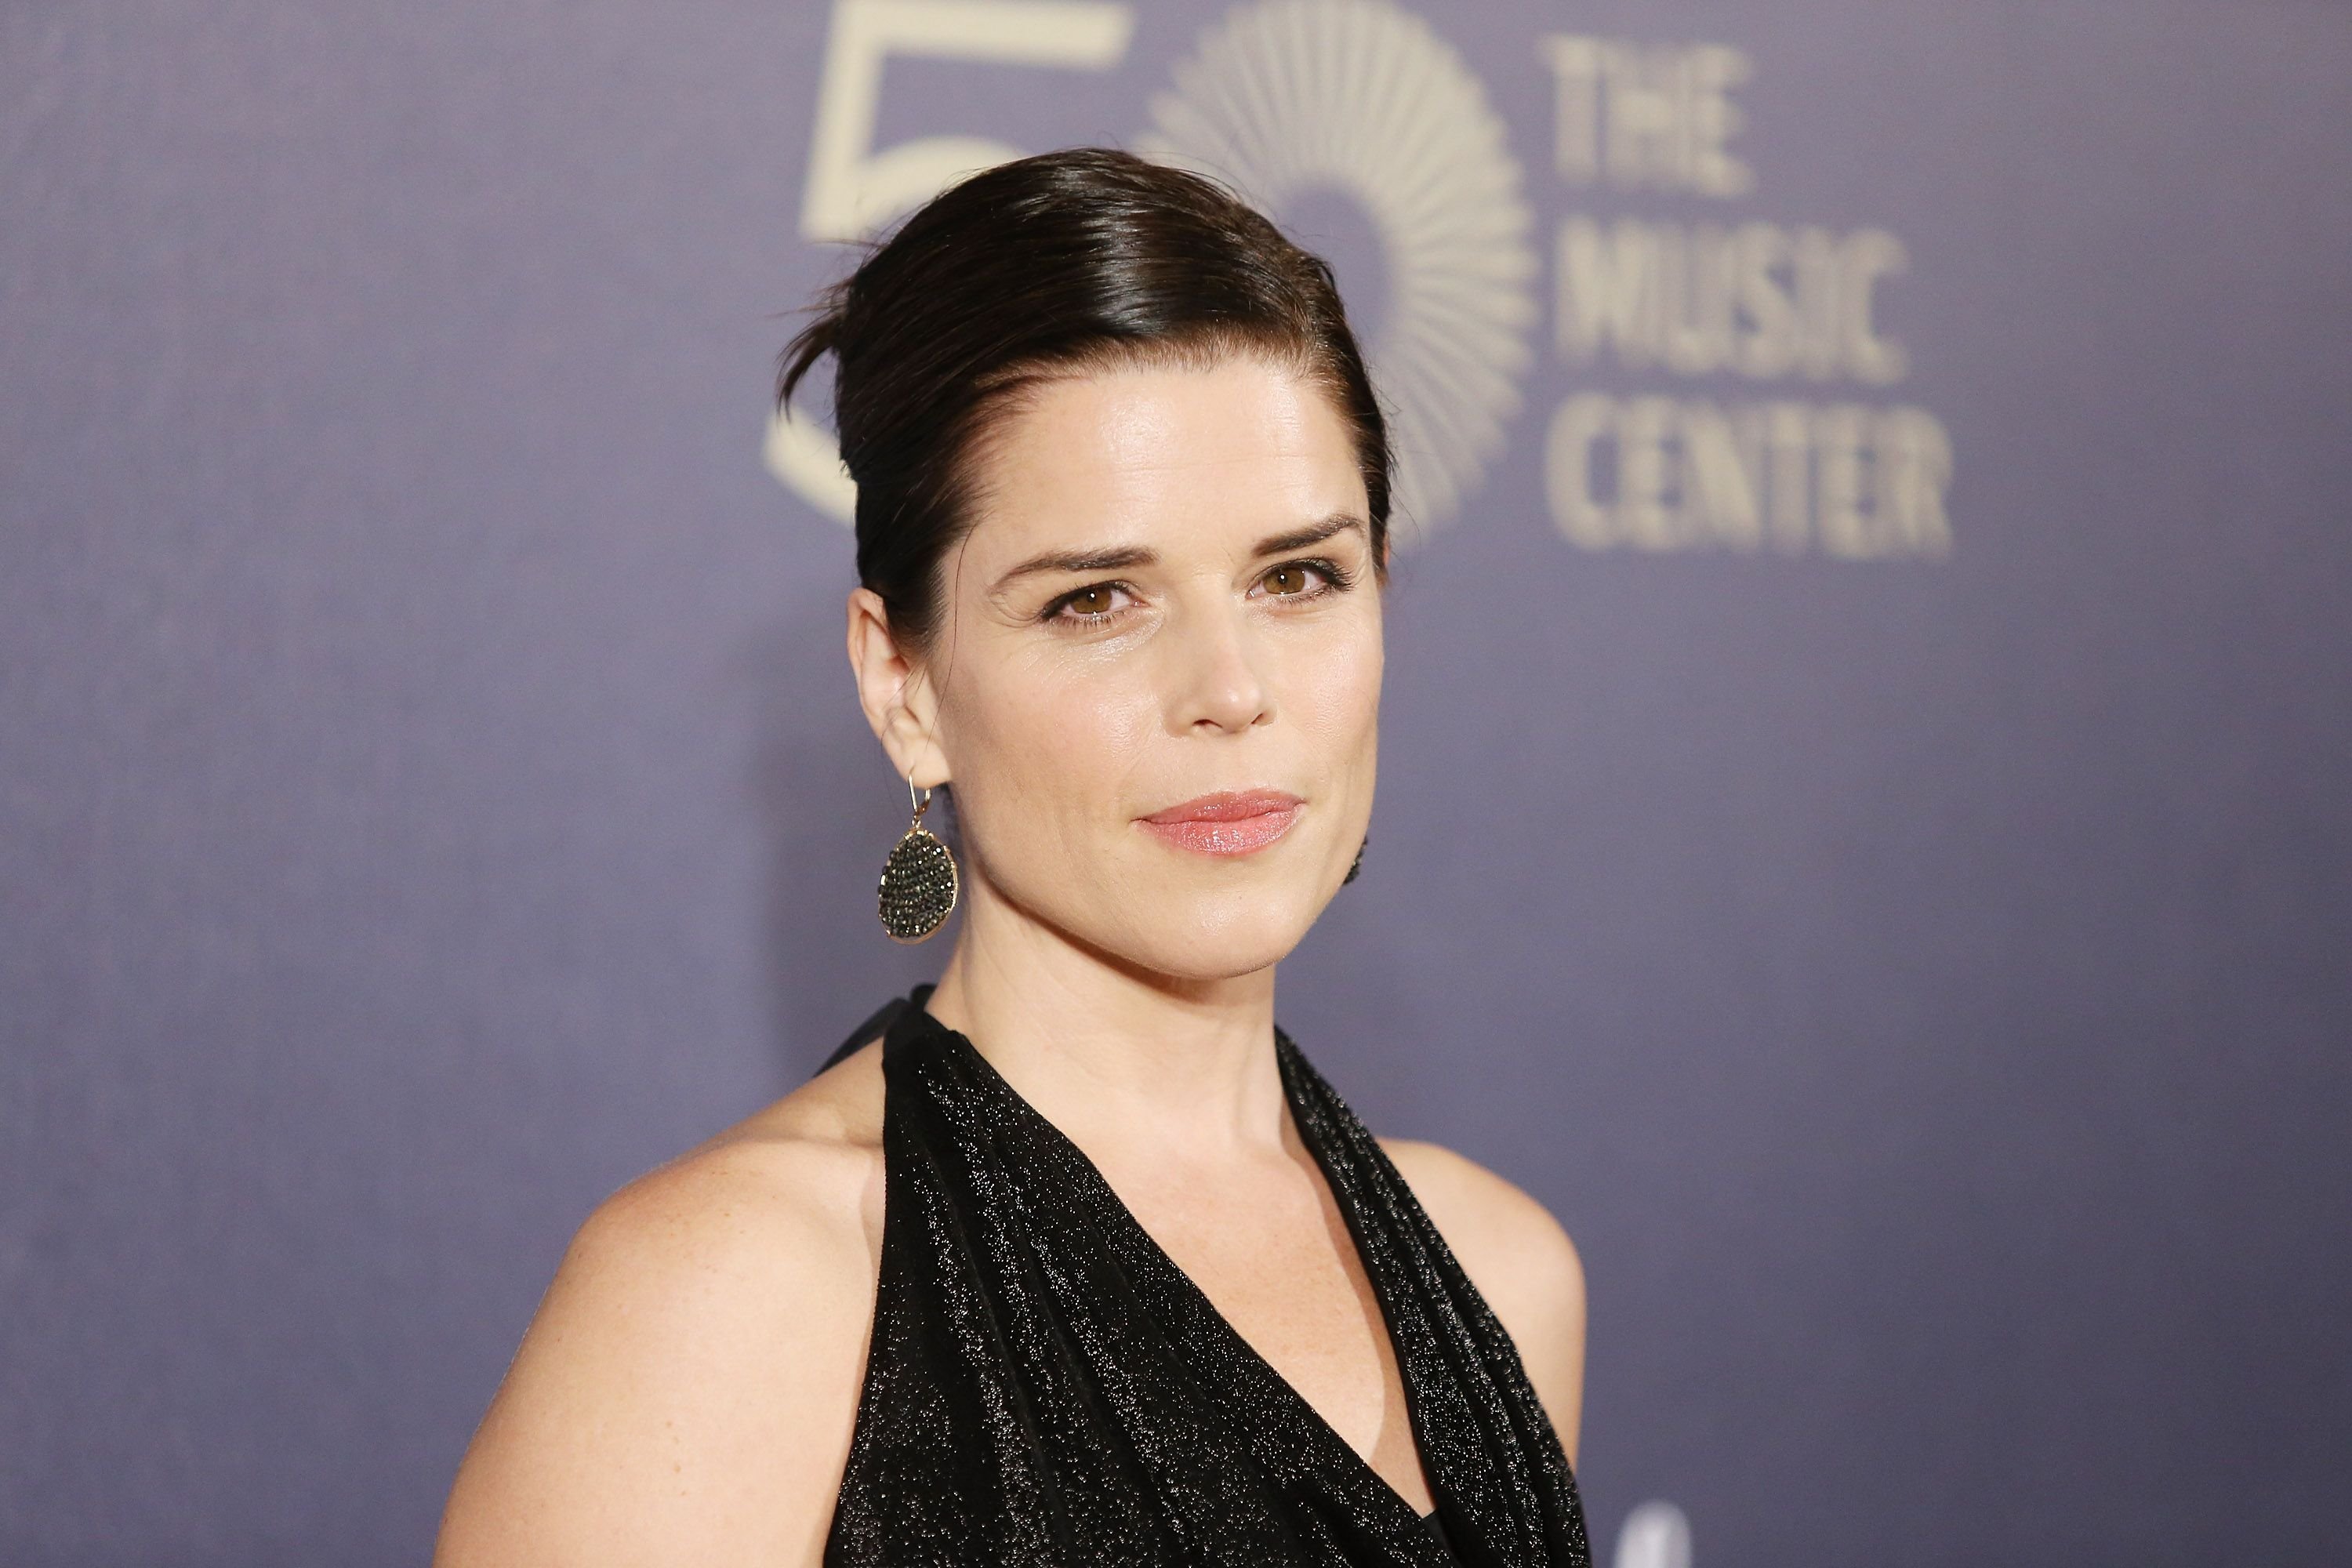 Neve Campbell at The Music Center's 50th Anniversary Spectacular in 2014 in Los Angeles, California | Source: Getty Images